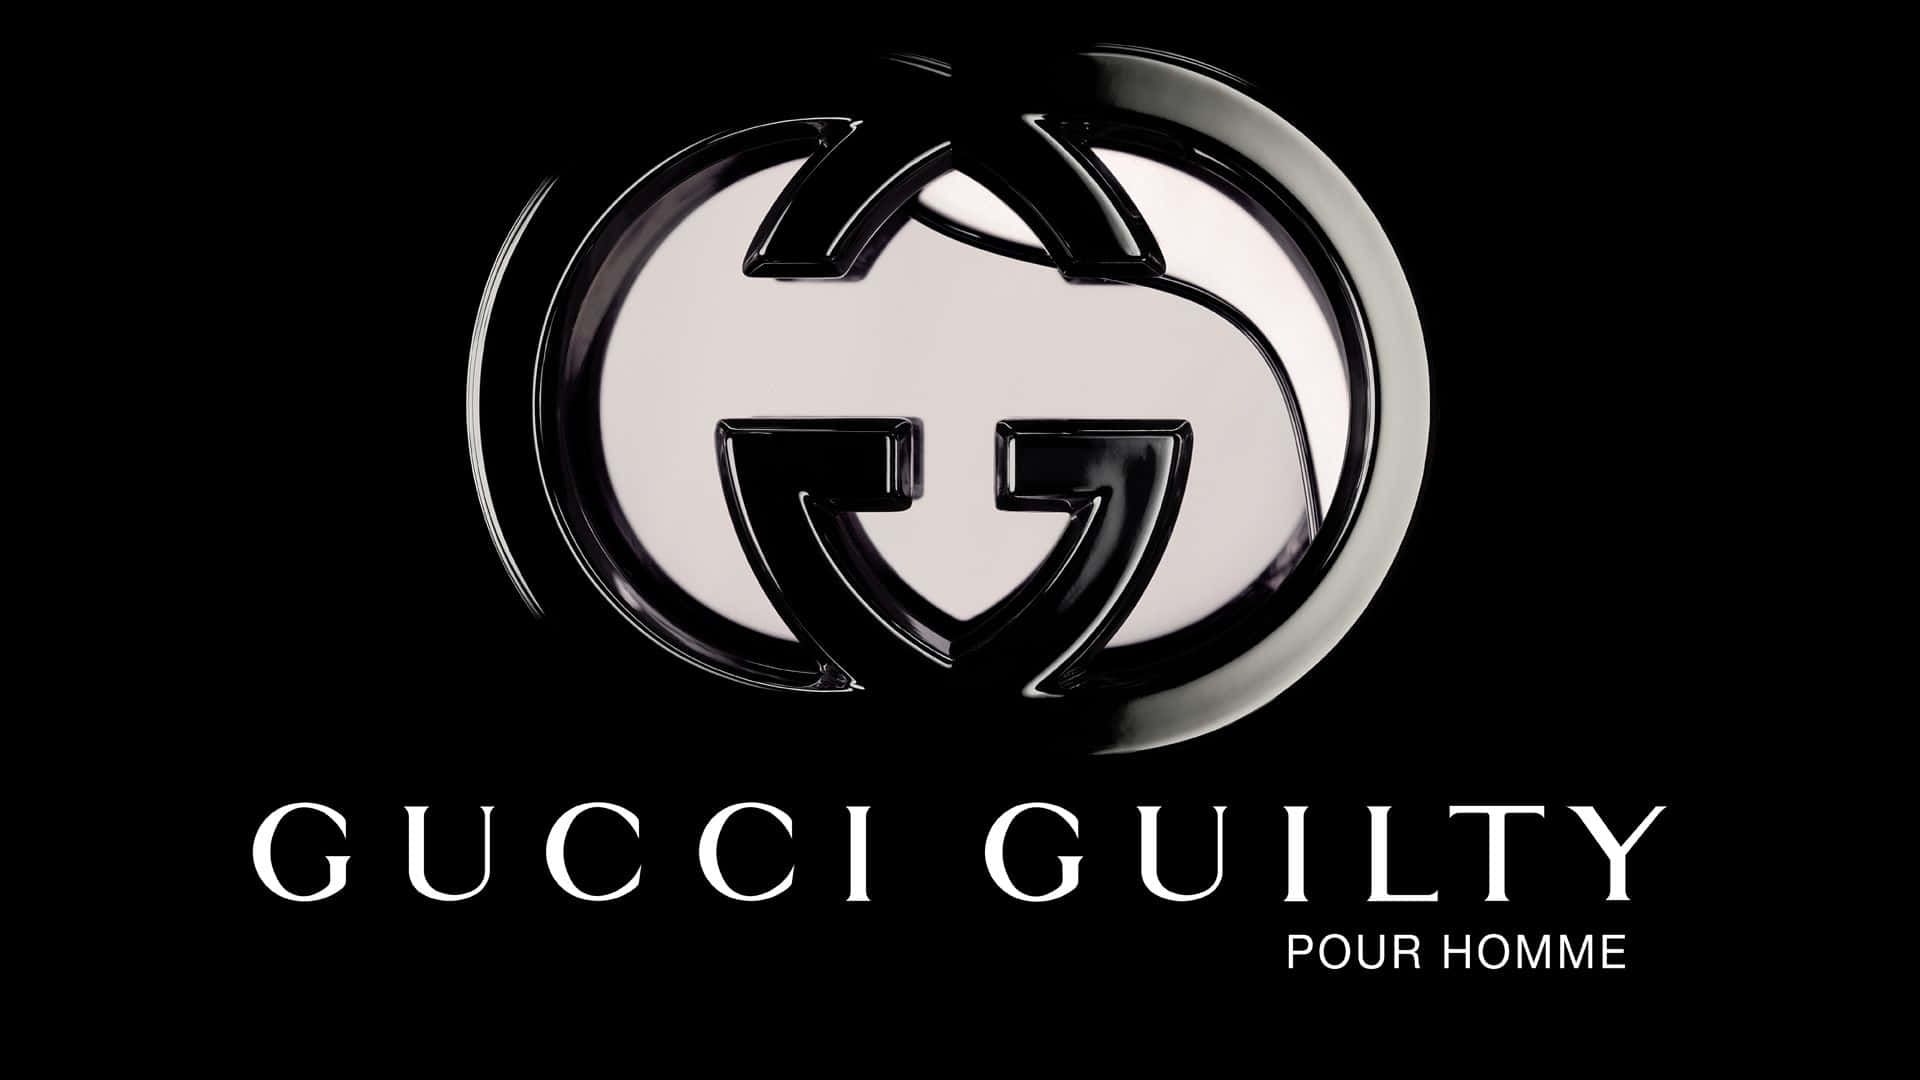 Artistic Shiny Silver Gucci Guilty Logo Background